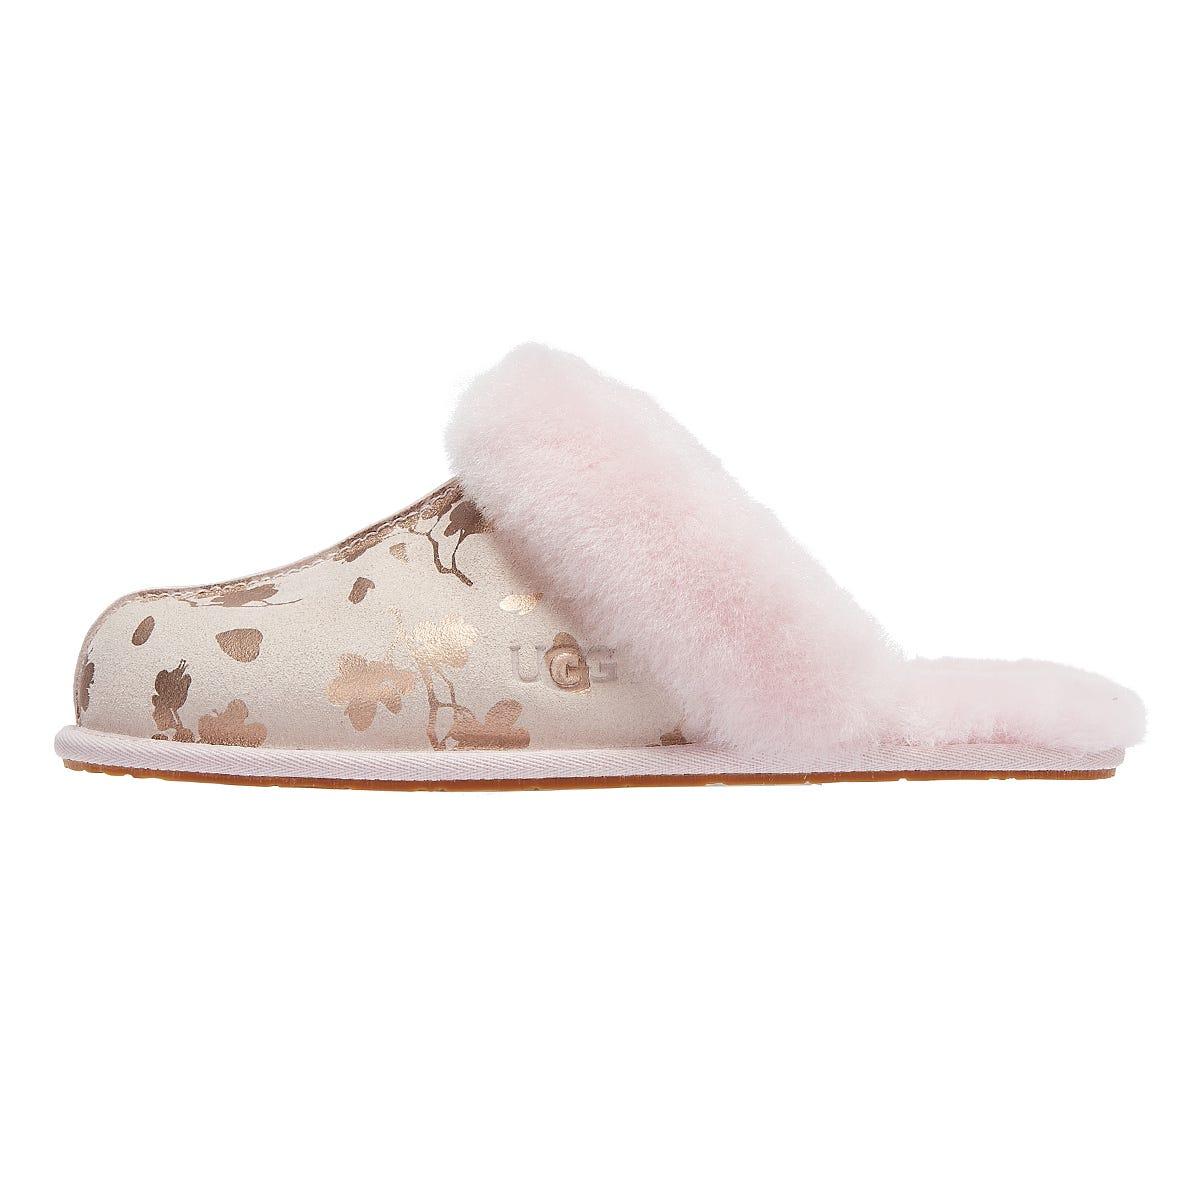 UGG Suede Scuffette Ii Floral Foil Seashell Slippers in Pink - Lyst